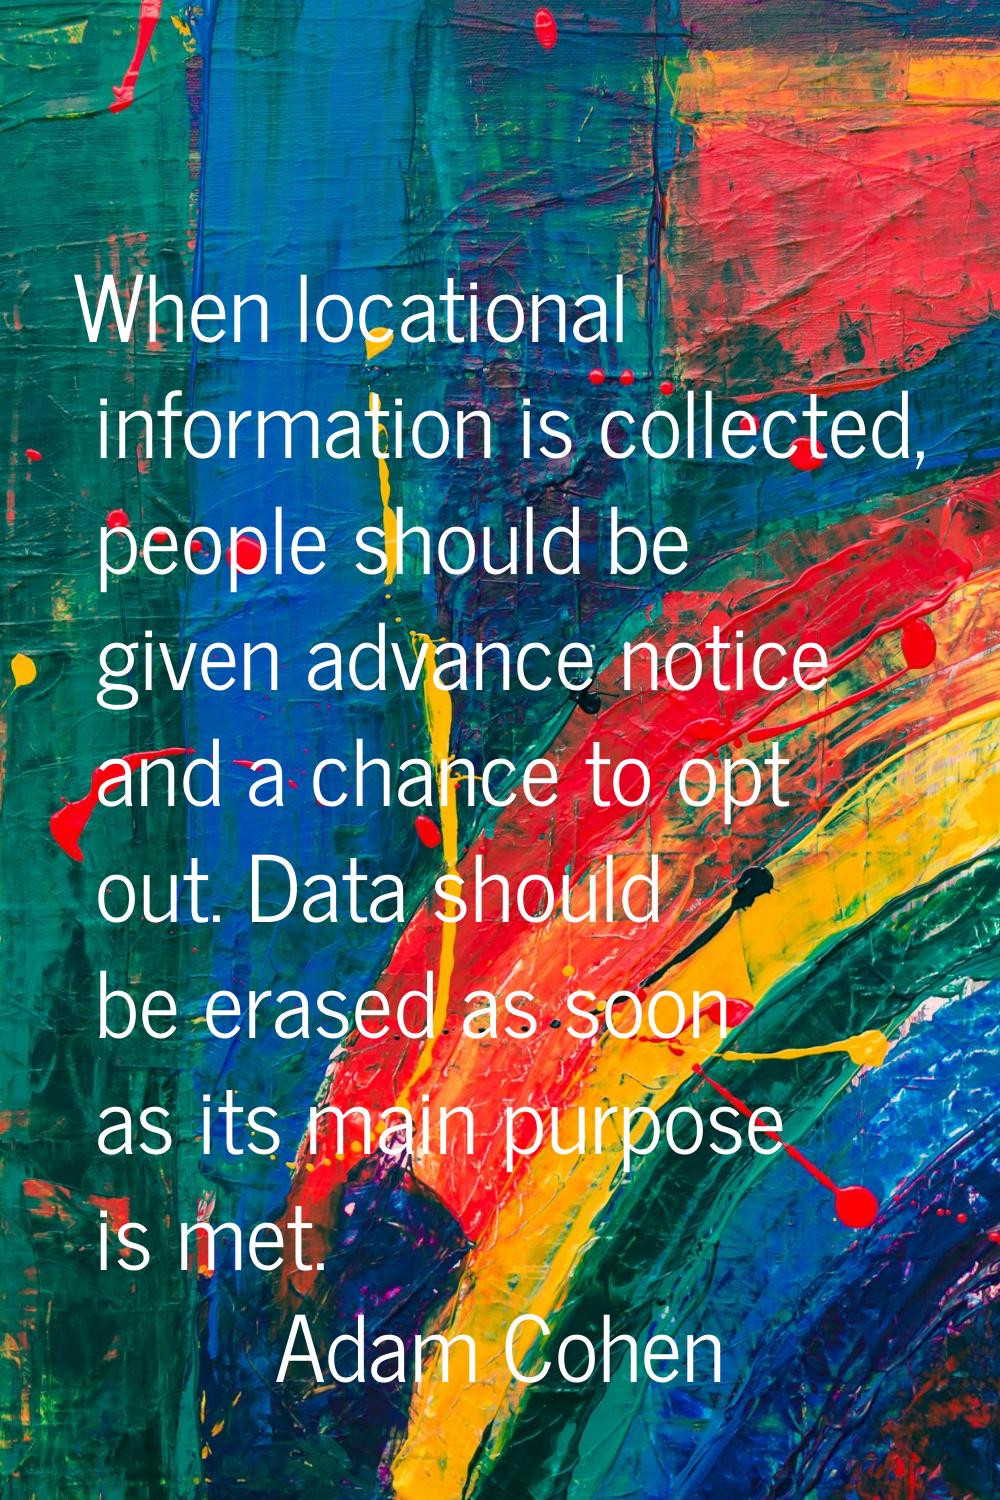 When locational information is collected, people should be given advance notice and a chance to opt